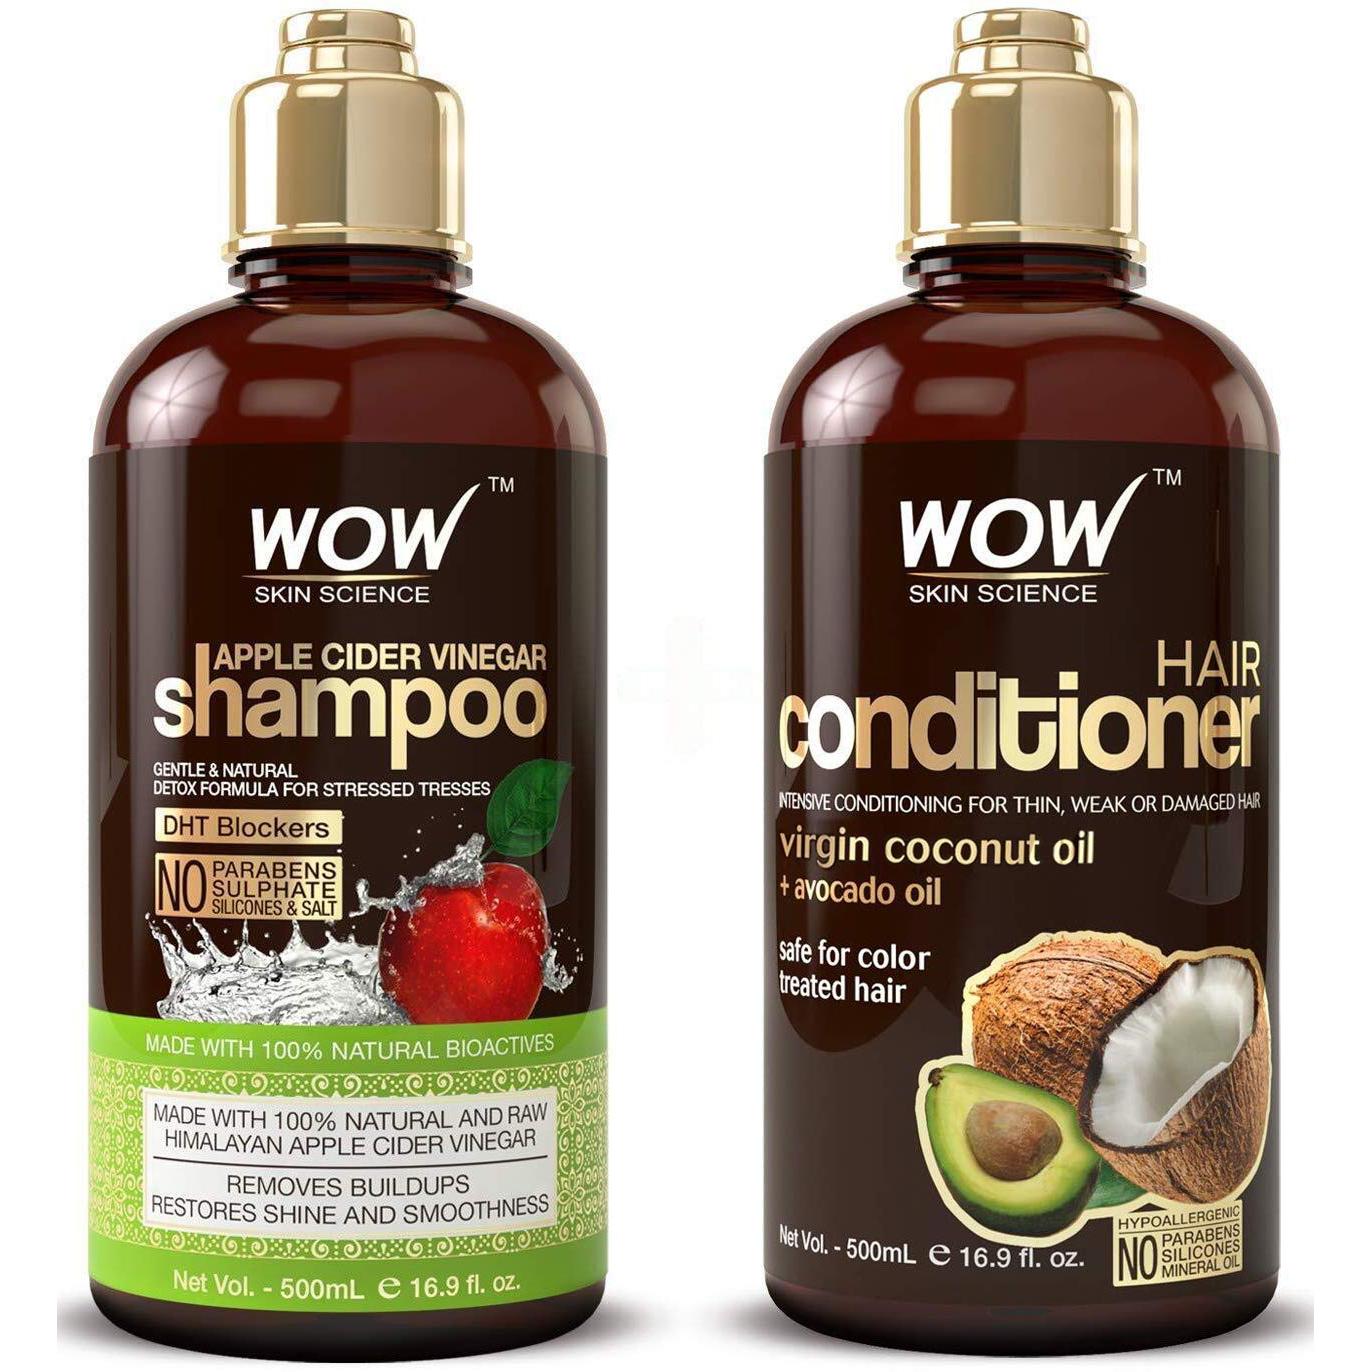 WOW Apple Cider Vinegar Shampoo and Conditioner Set for $19.46